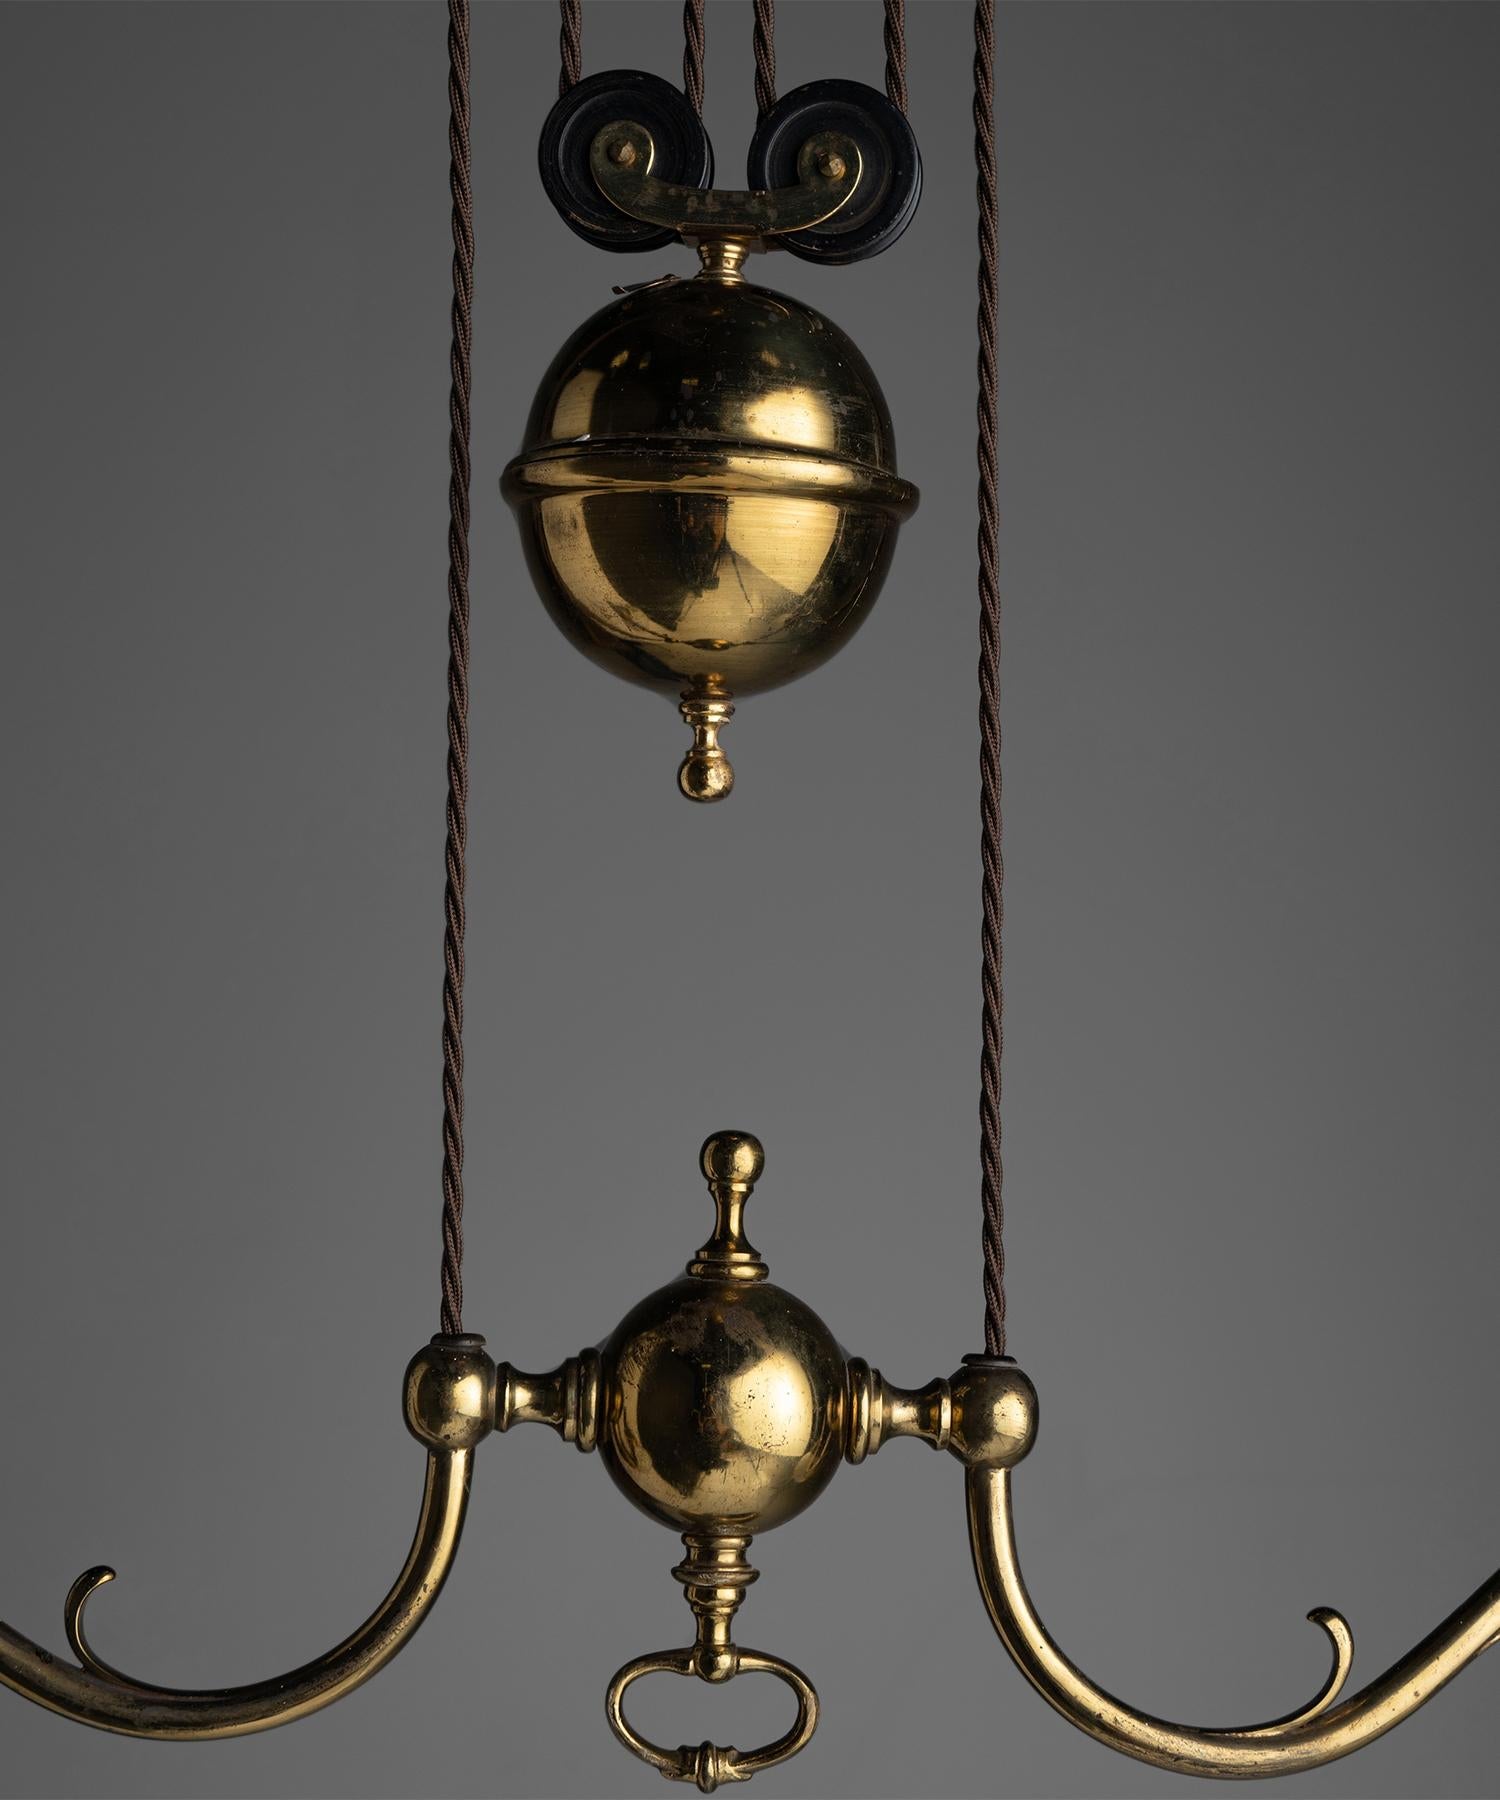 Early 20th Century Rise & Fall Gilt Brass Chandeliers, England, circa 1910